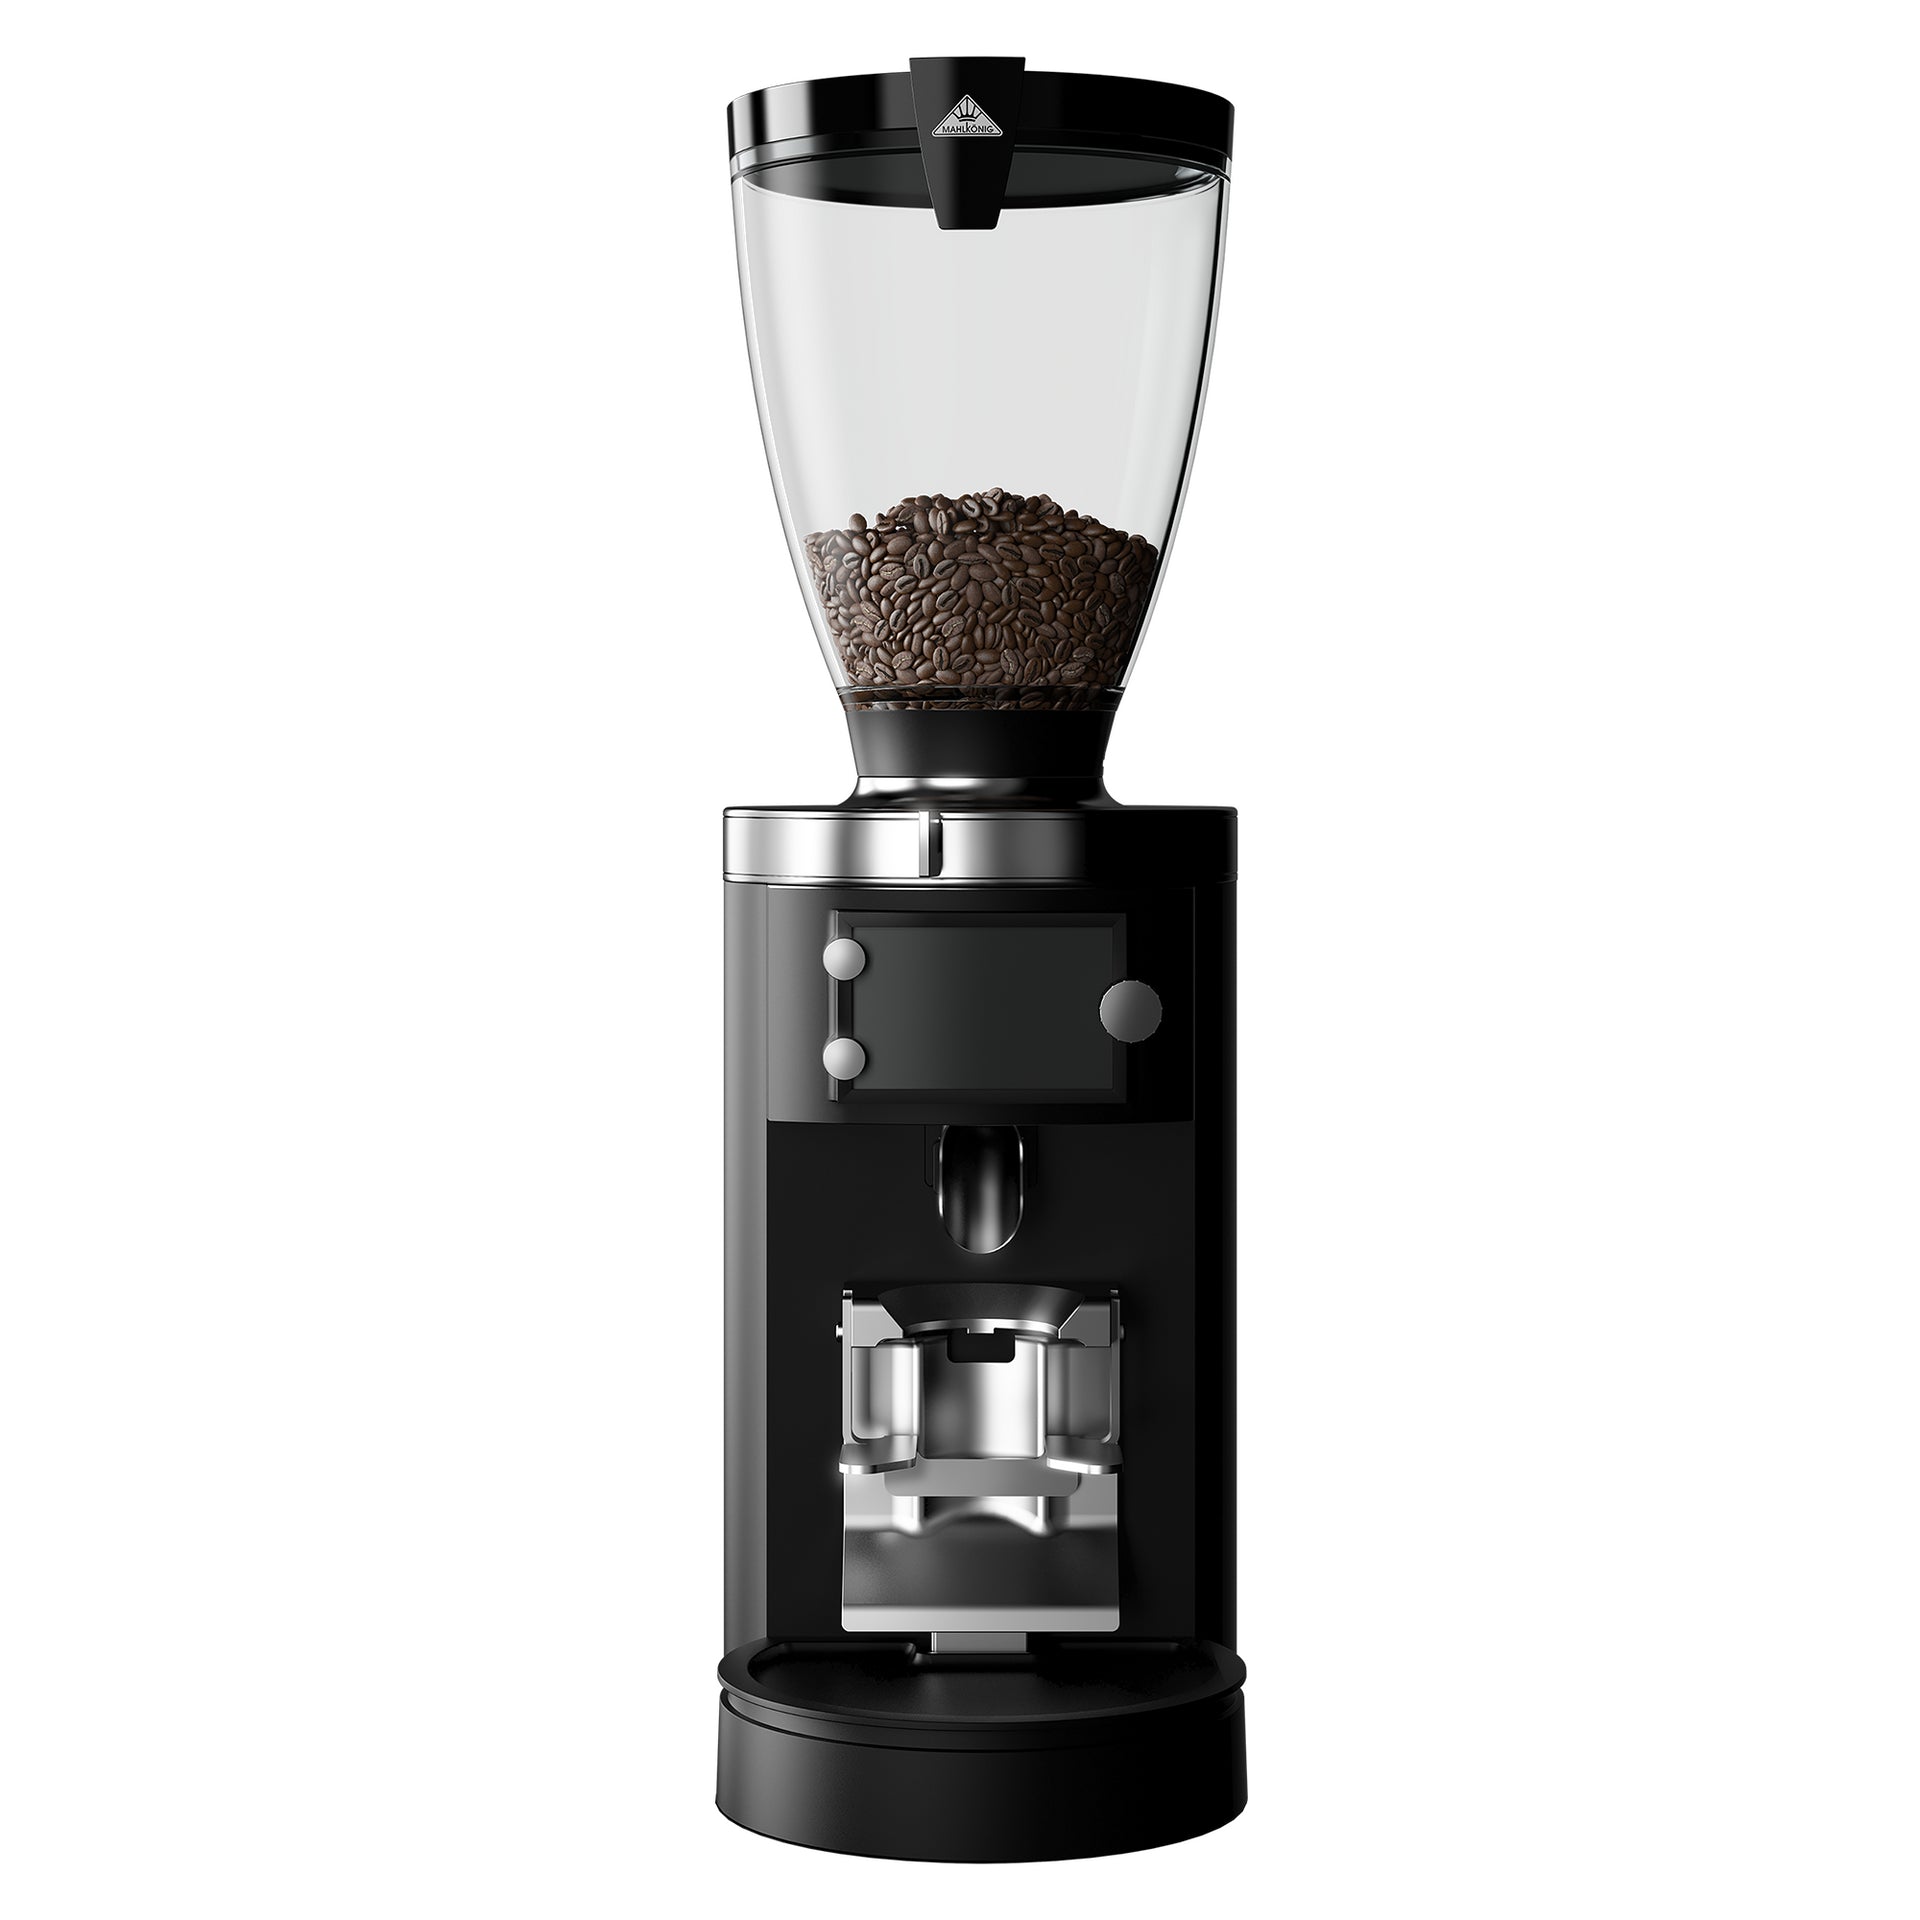 Mahlkonig Coffee Grinder E65S GBW - Grind By Weight